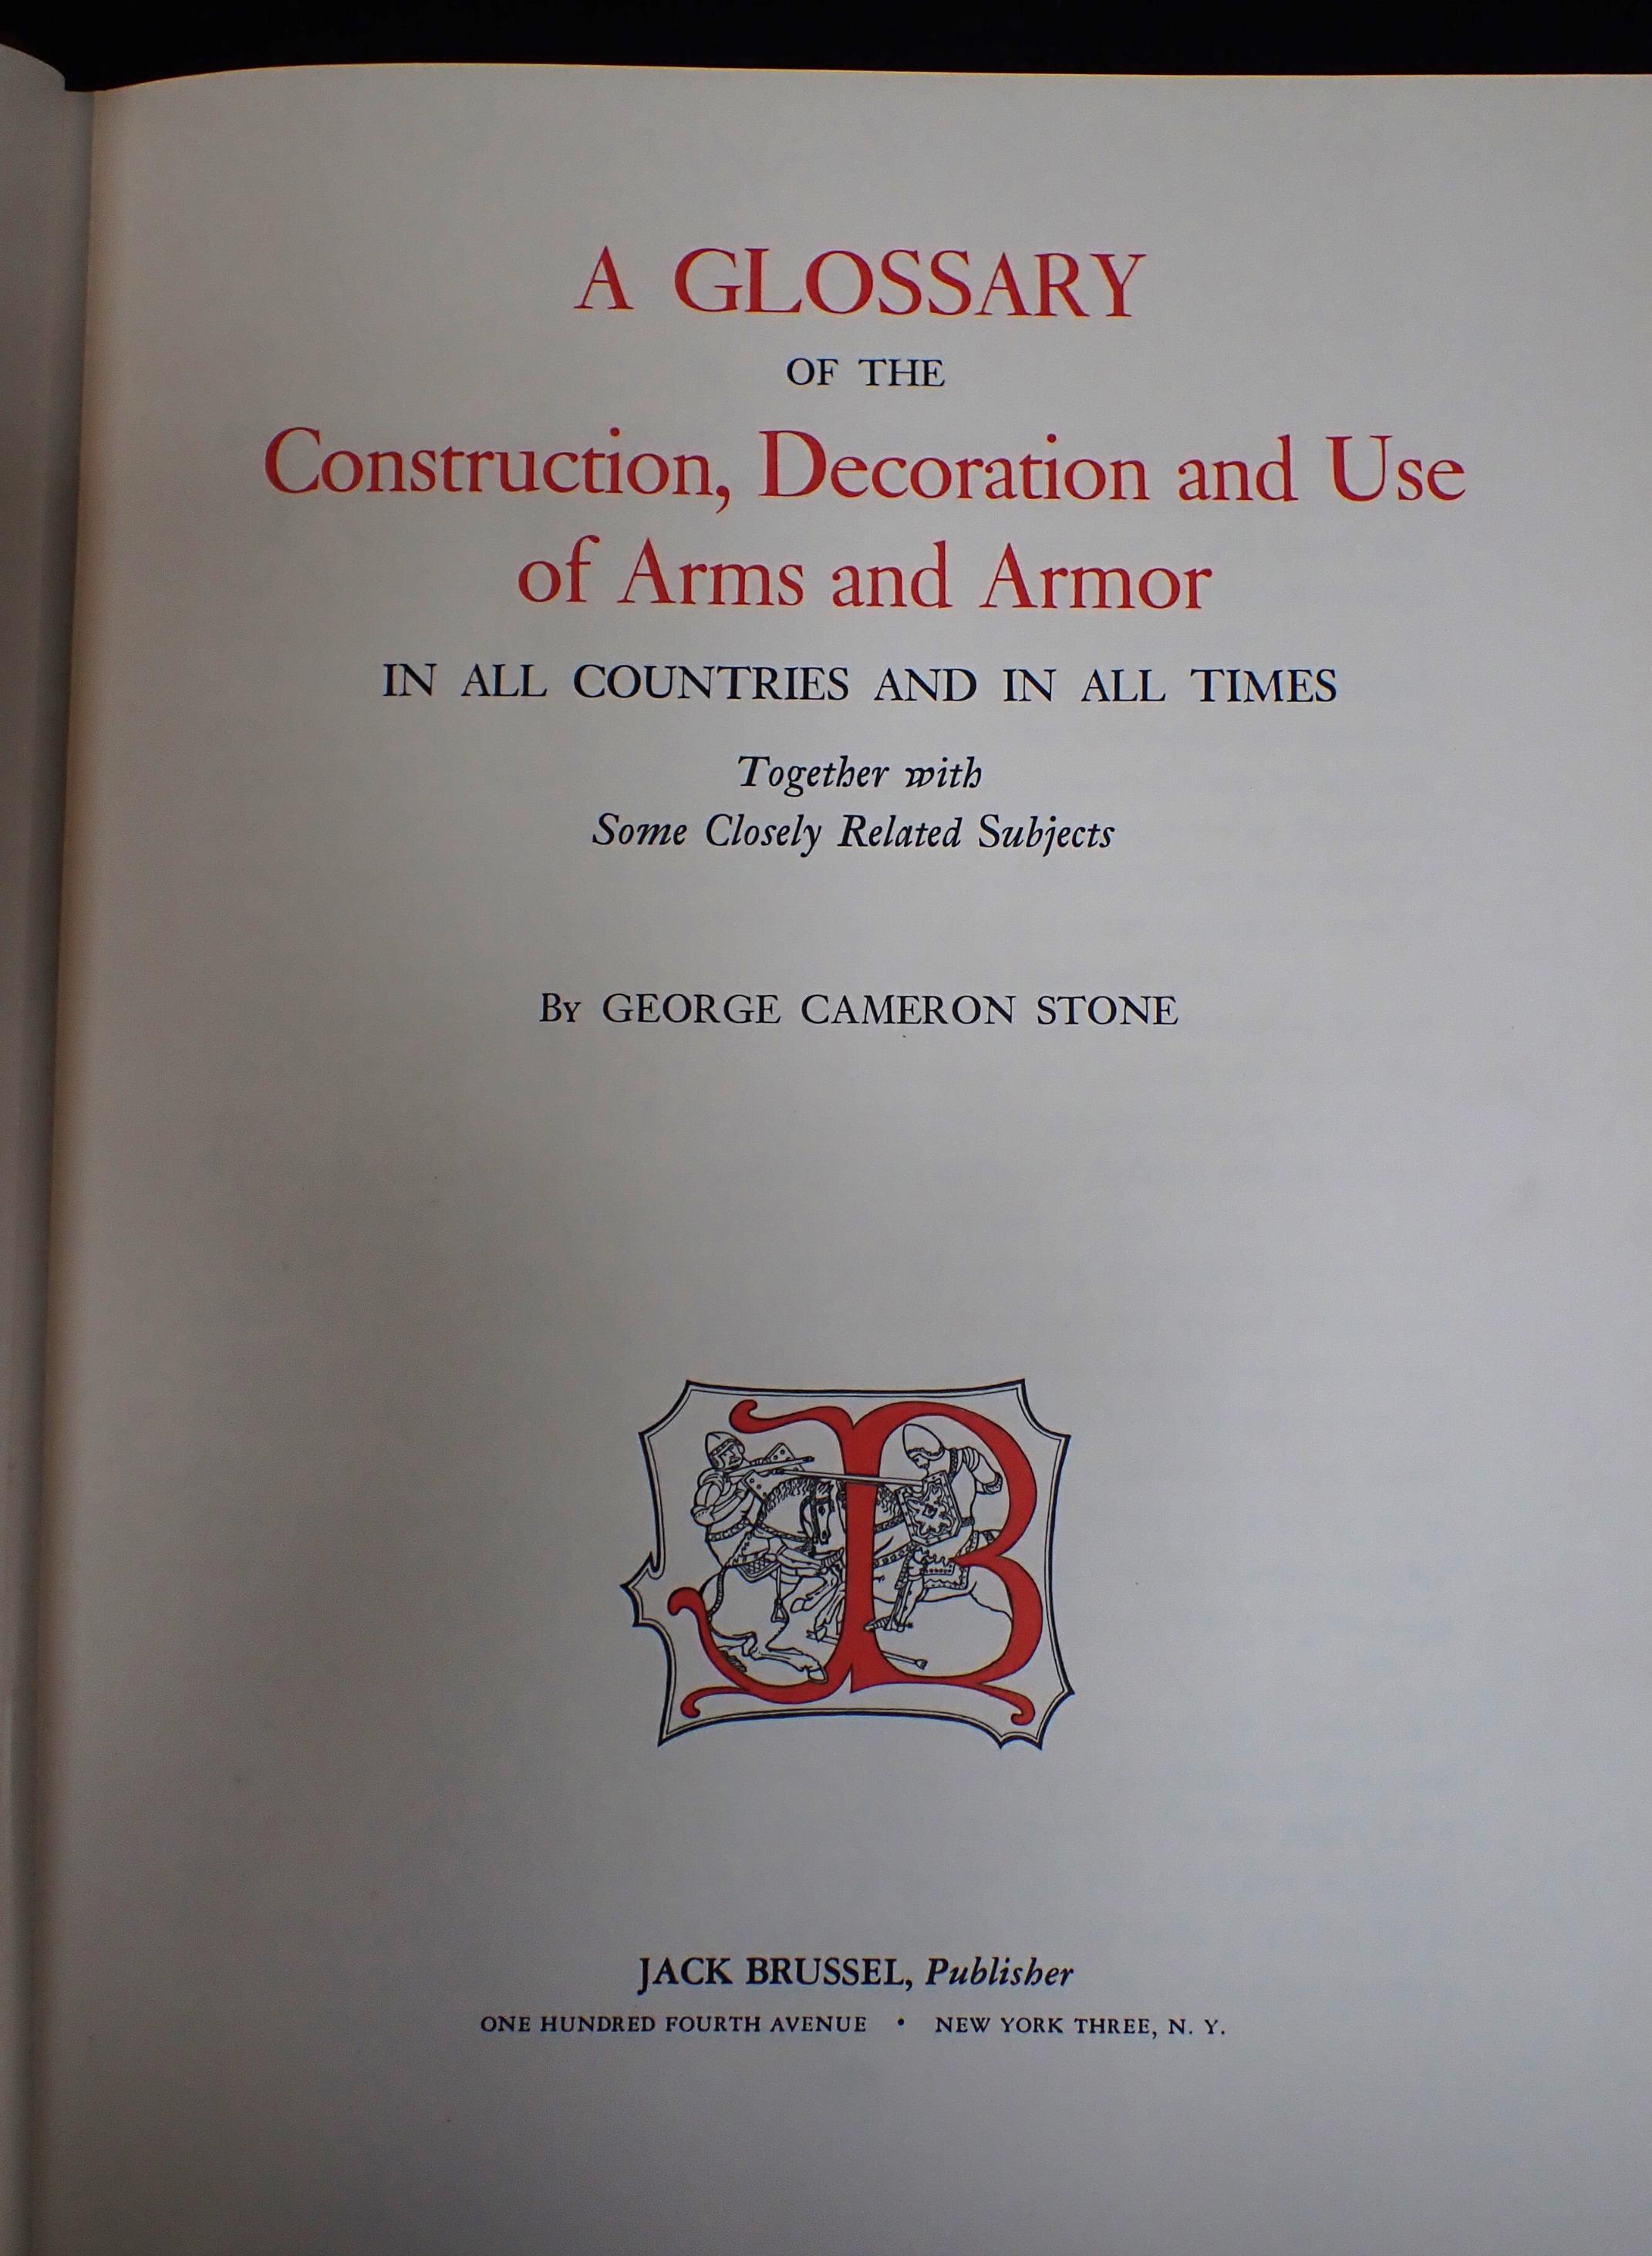 STONE, GEORGE C. 'A GLOSSARY OF THE CONSTRUCTION, DECORATION AND USE OF ARMS AND ARMOR' - Image 3 of 4